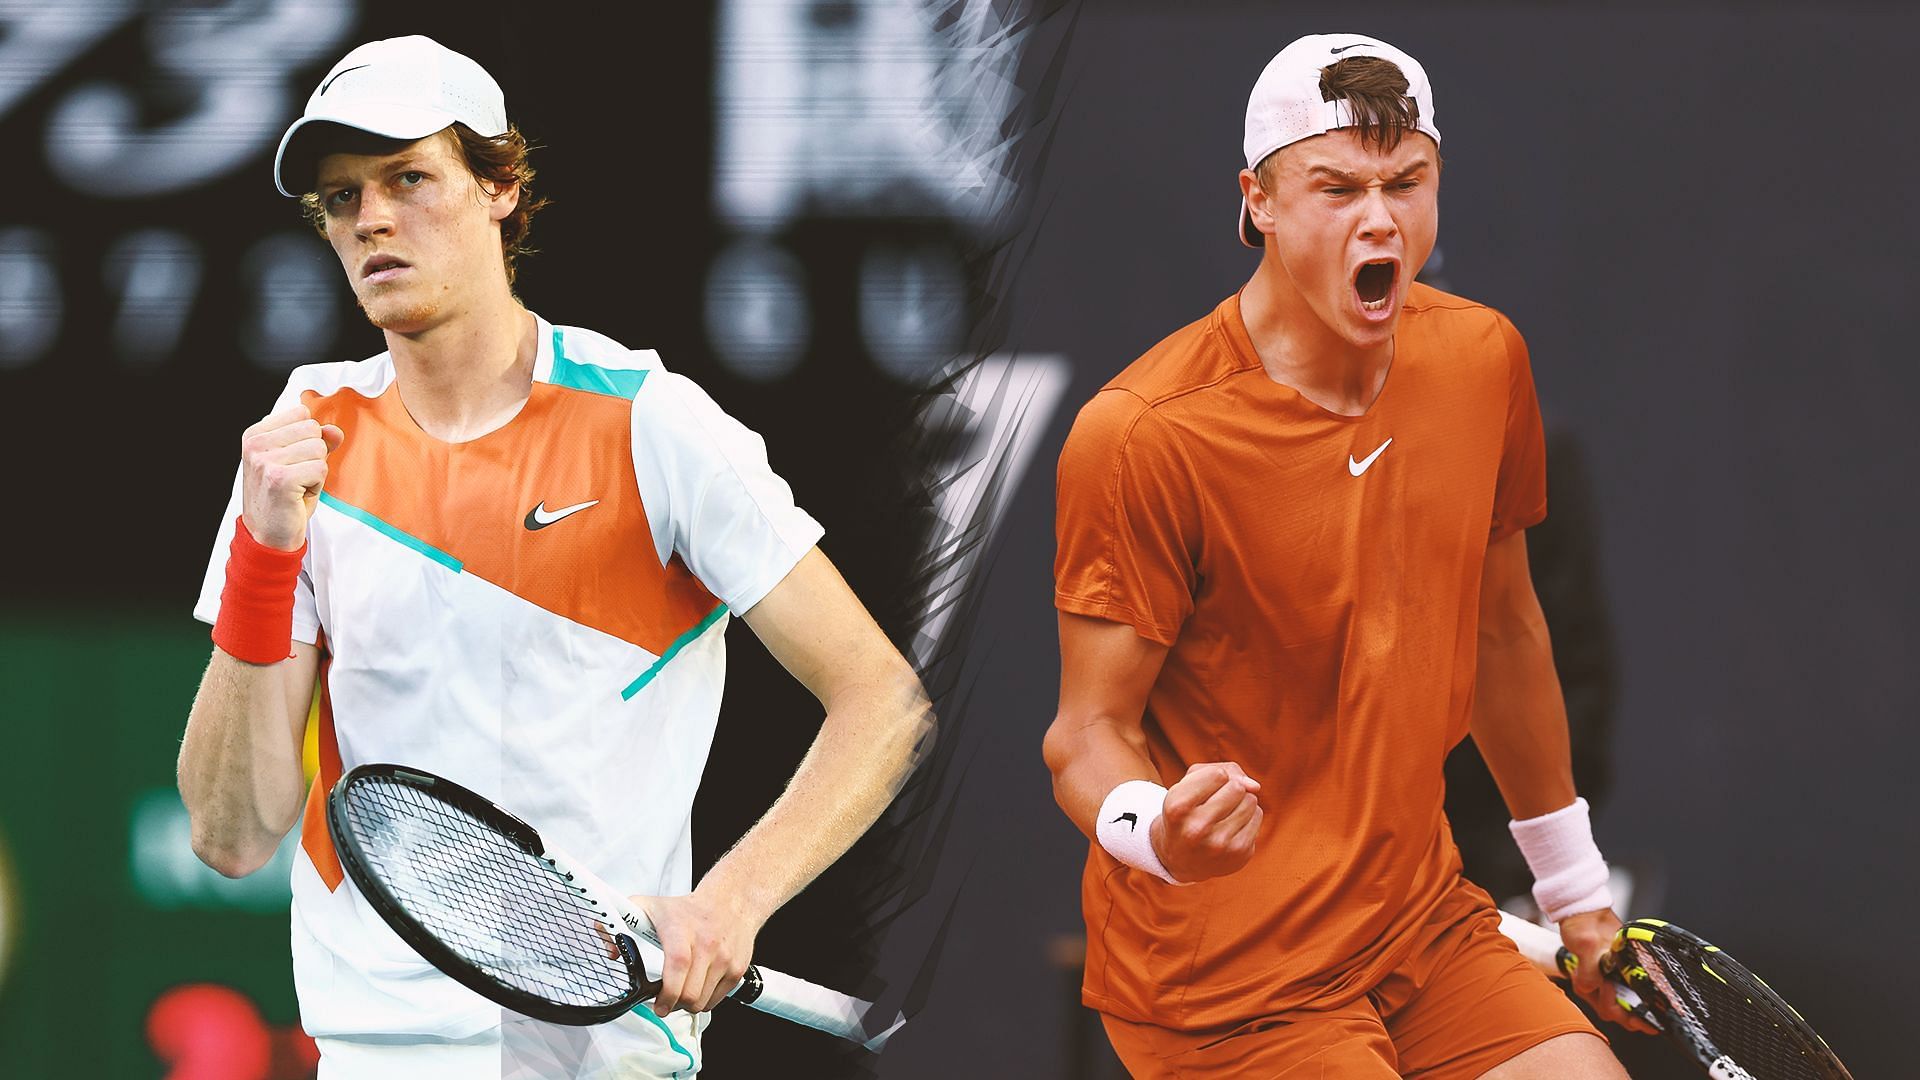 Jannik Sinner vs Holger Rune is one of the group ties at the 2023 ATP Finals.